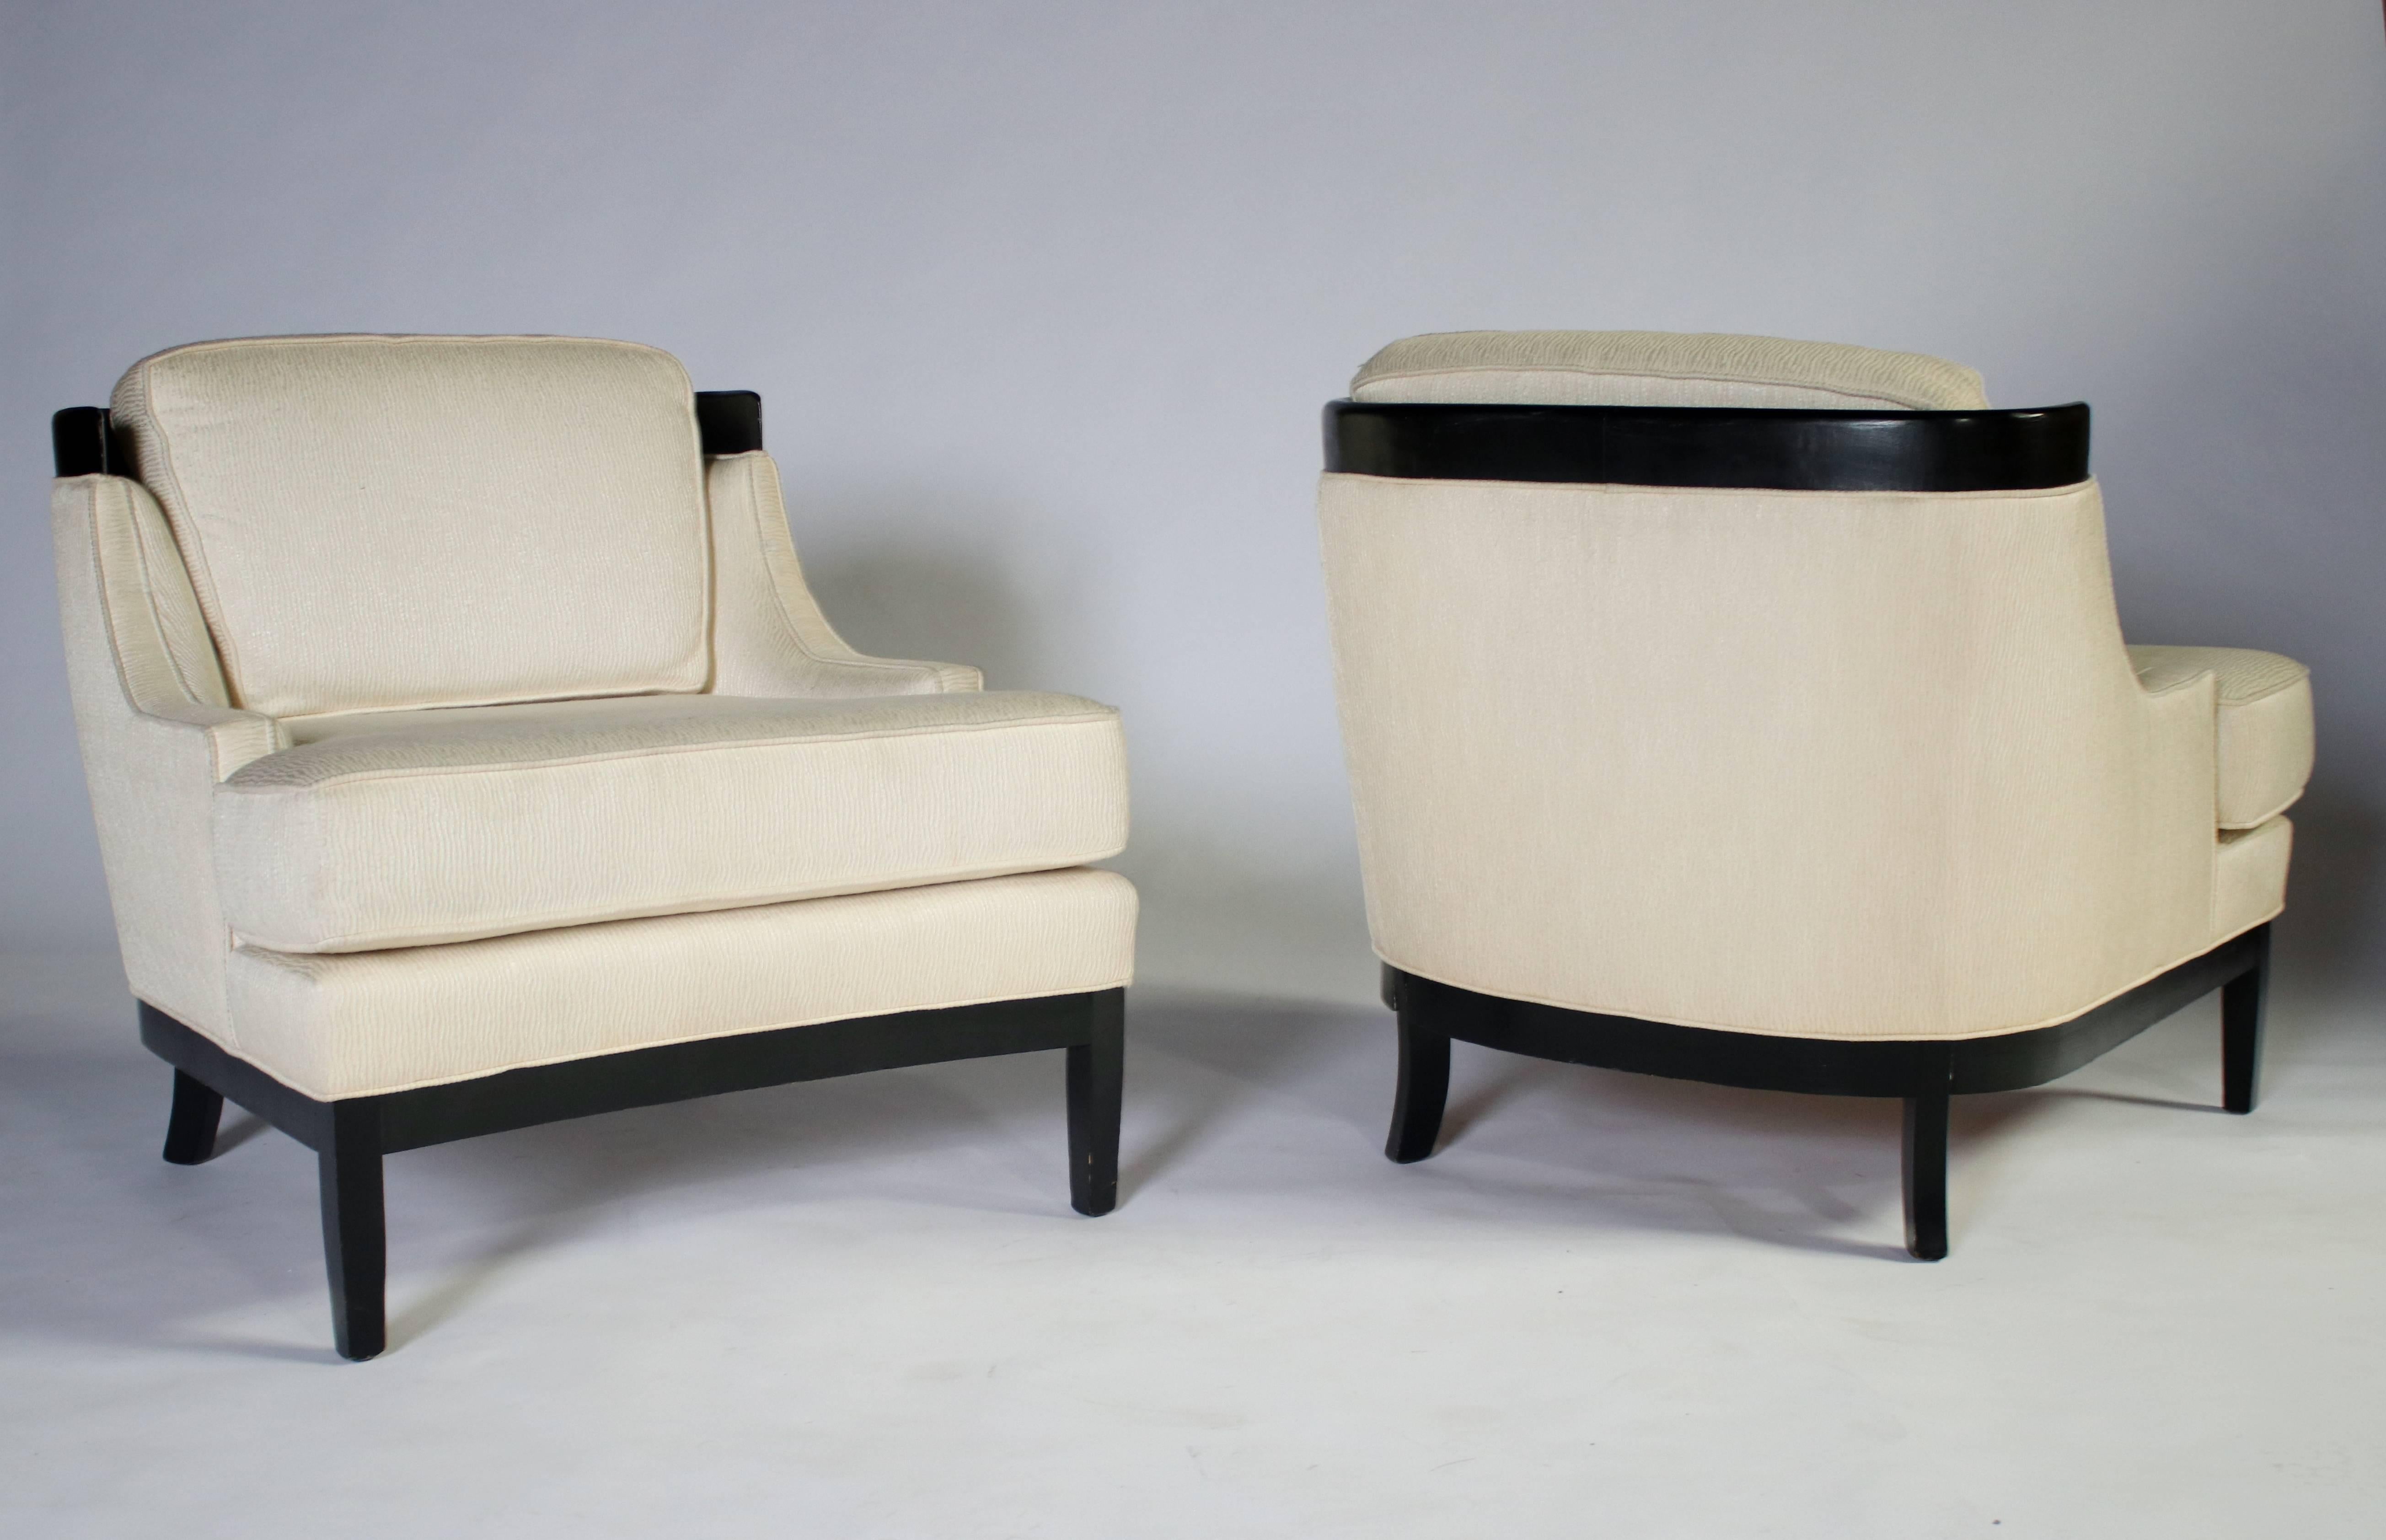 Classic pair of 1960s Hollywood Regency lounge chairs by Erwin-Lambeth. Black lacquered wood frame and upholstered in a cream textured fabric. Removable cushions in excellent vintage condition with age appropriate wear.